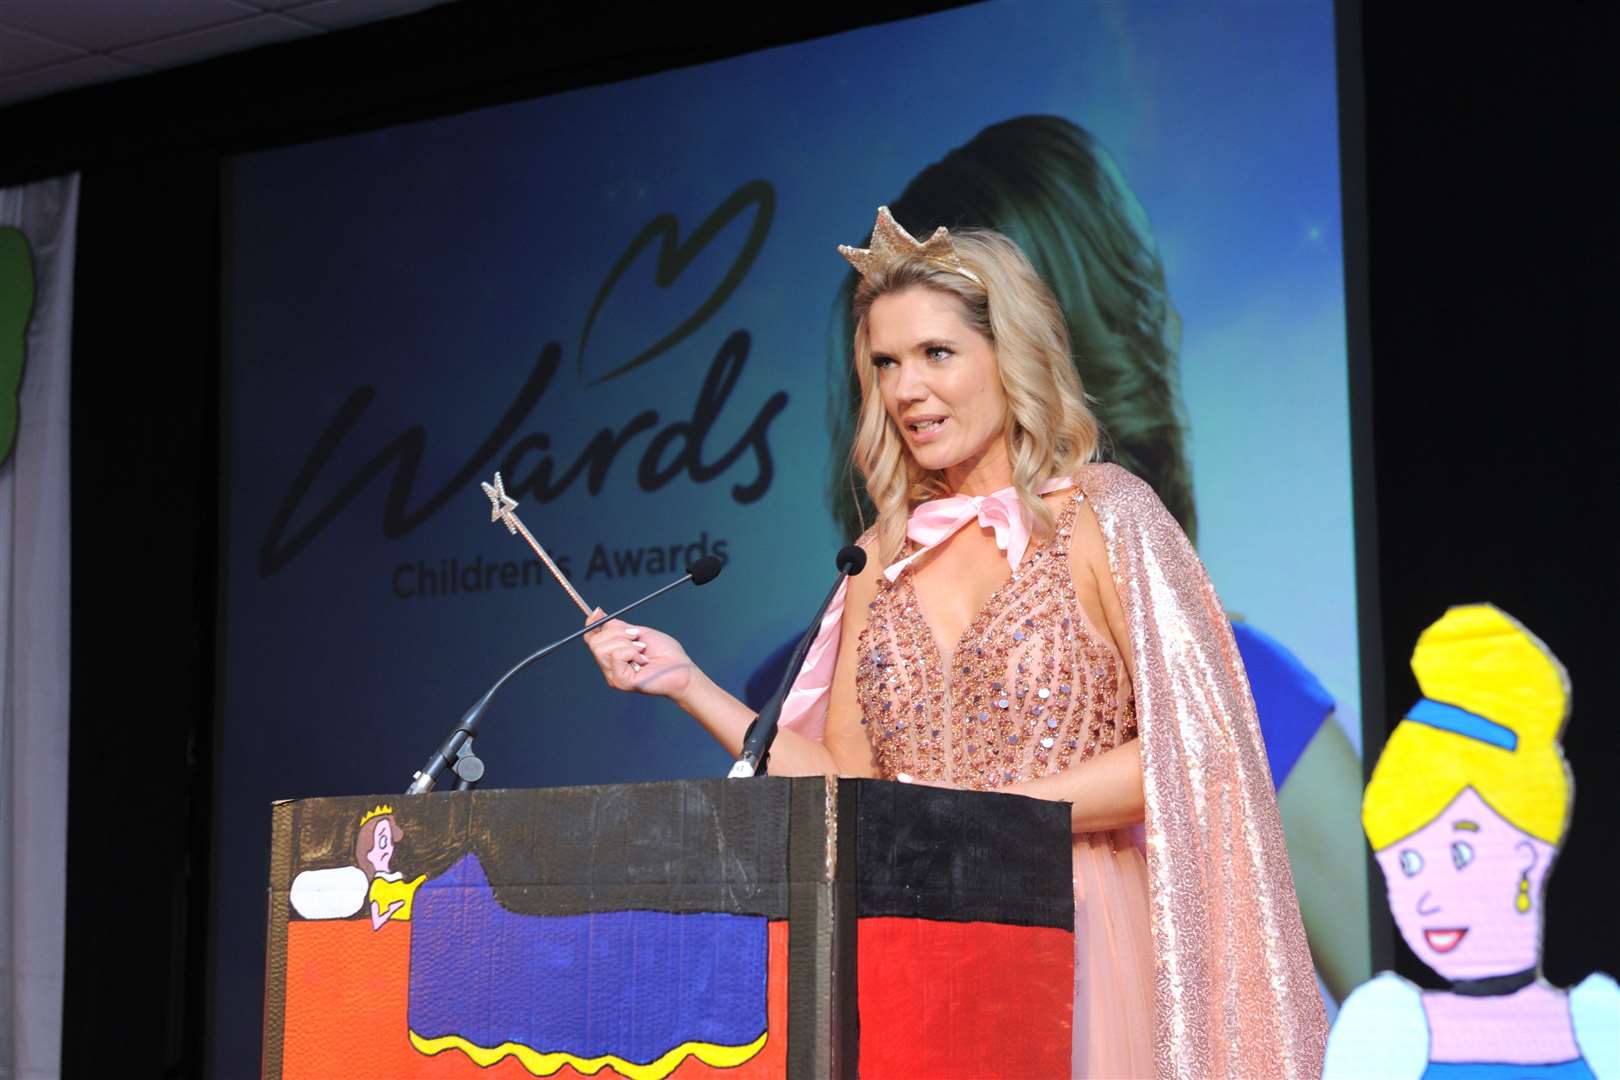 Presenter Charlotte Hawkins will once again host the event